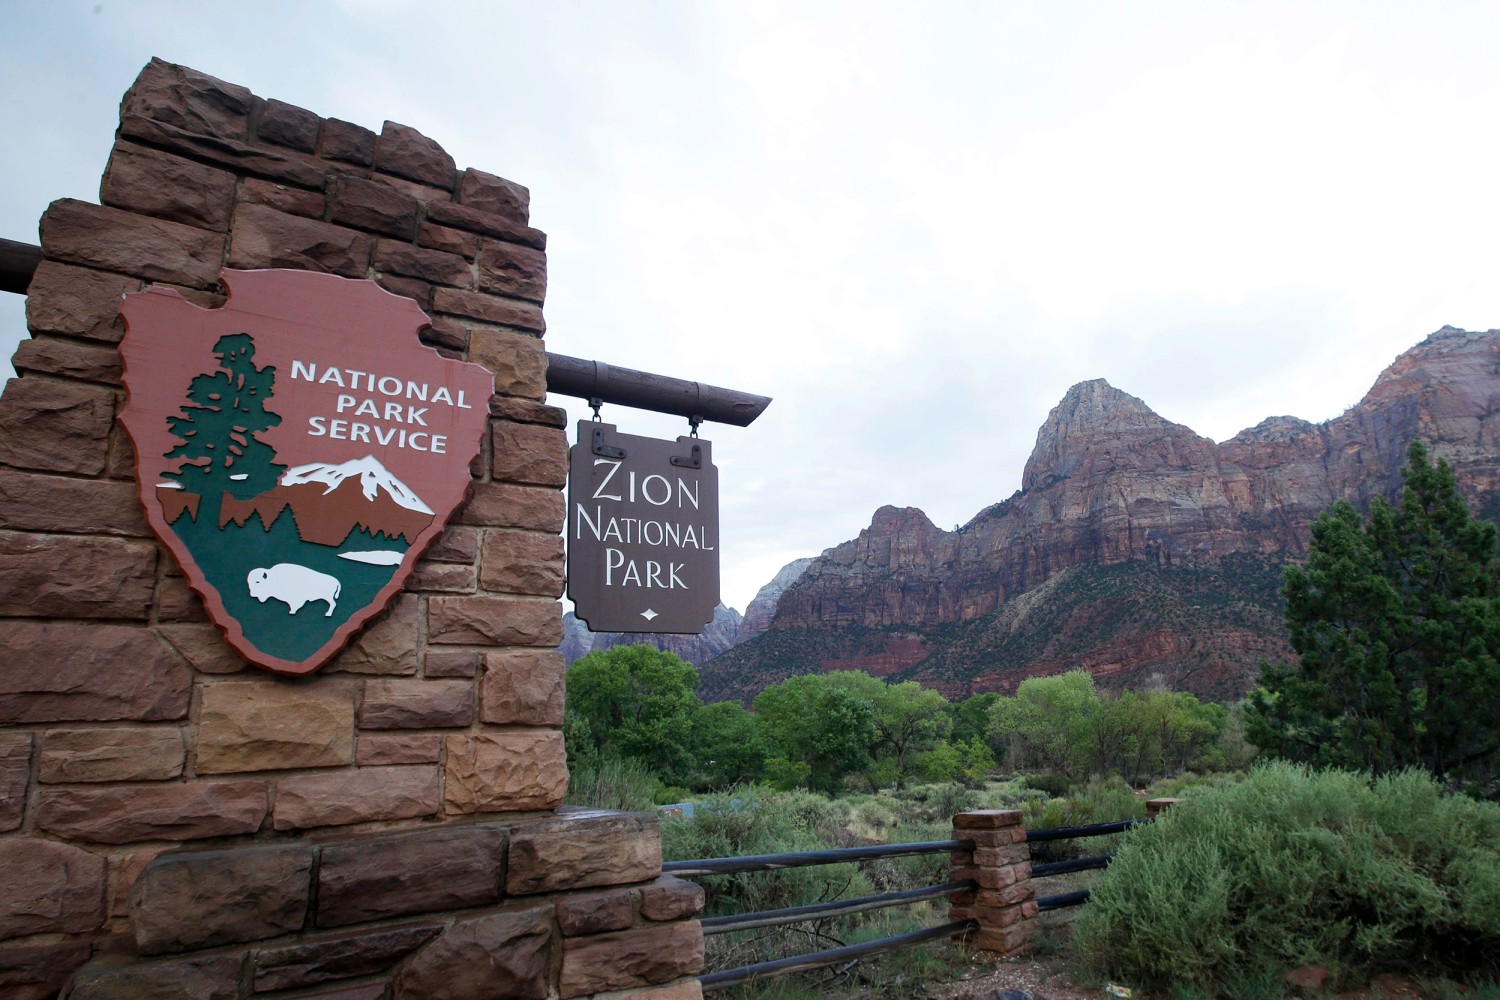 Zion National Park - The beloved iconic flat hat is a symbol of the NPS  rangers commitment to service and dedication that they bring to their jobs.  We wear it with pride